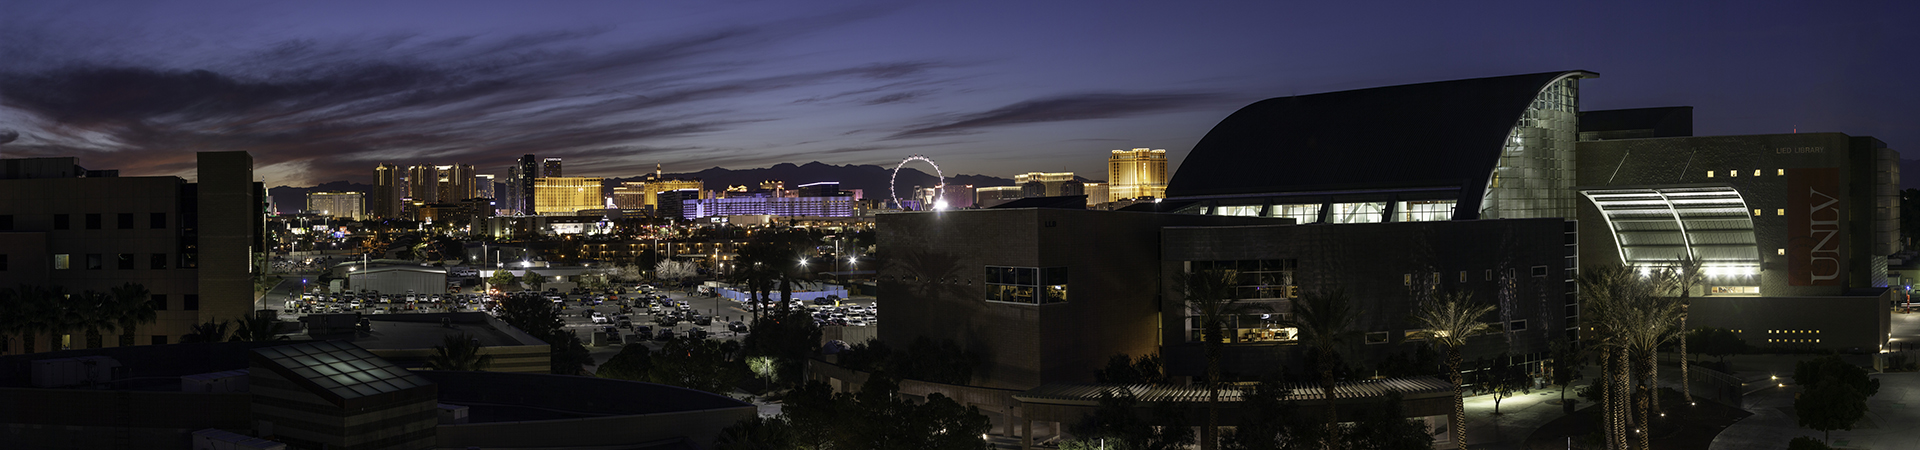 Night view of Lied Library with Las Vegas Strip lit up in background